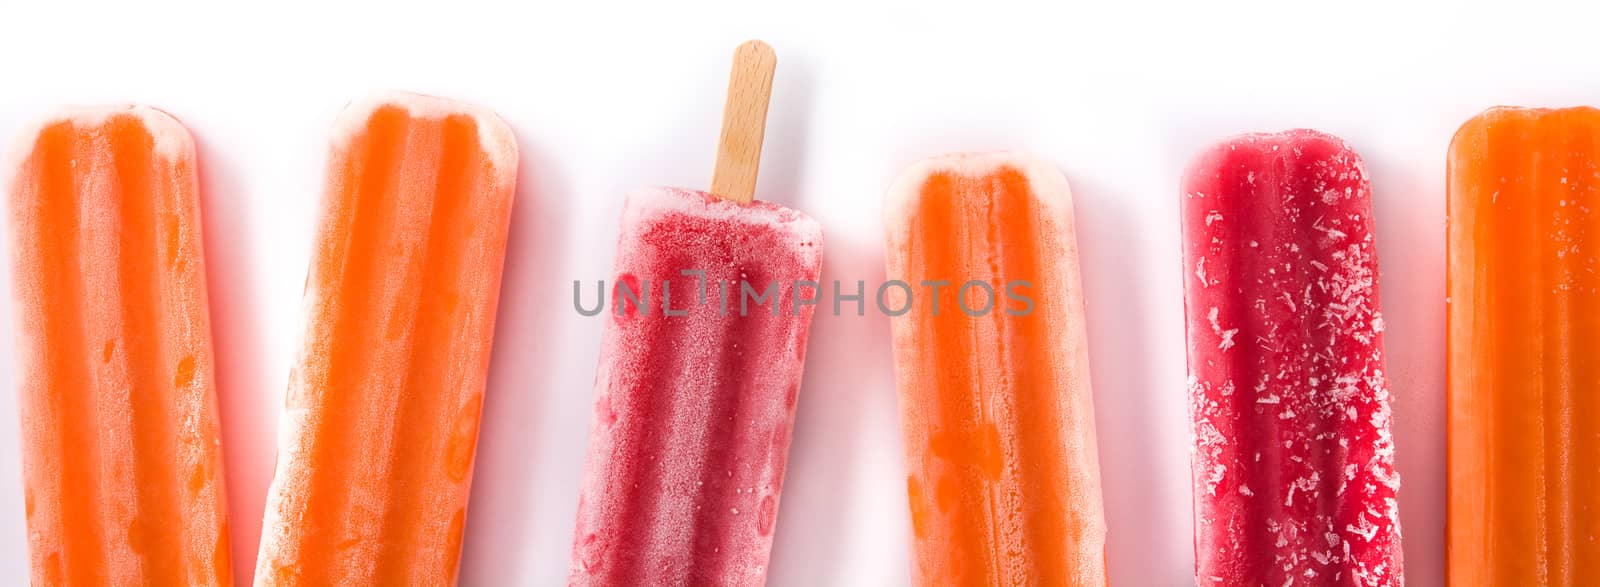 Orange and strawberry popsicles isolated on white background. by chandlervid85